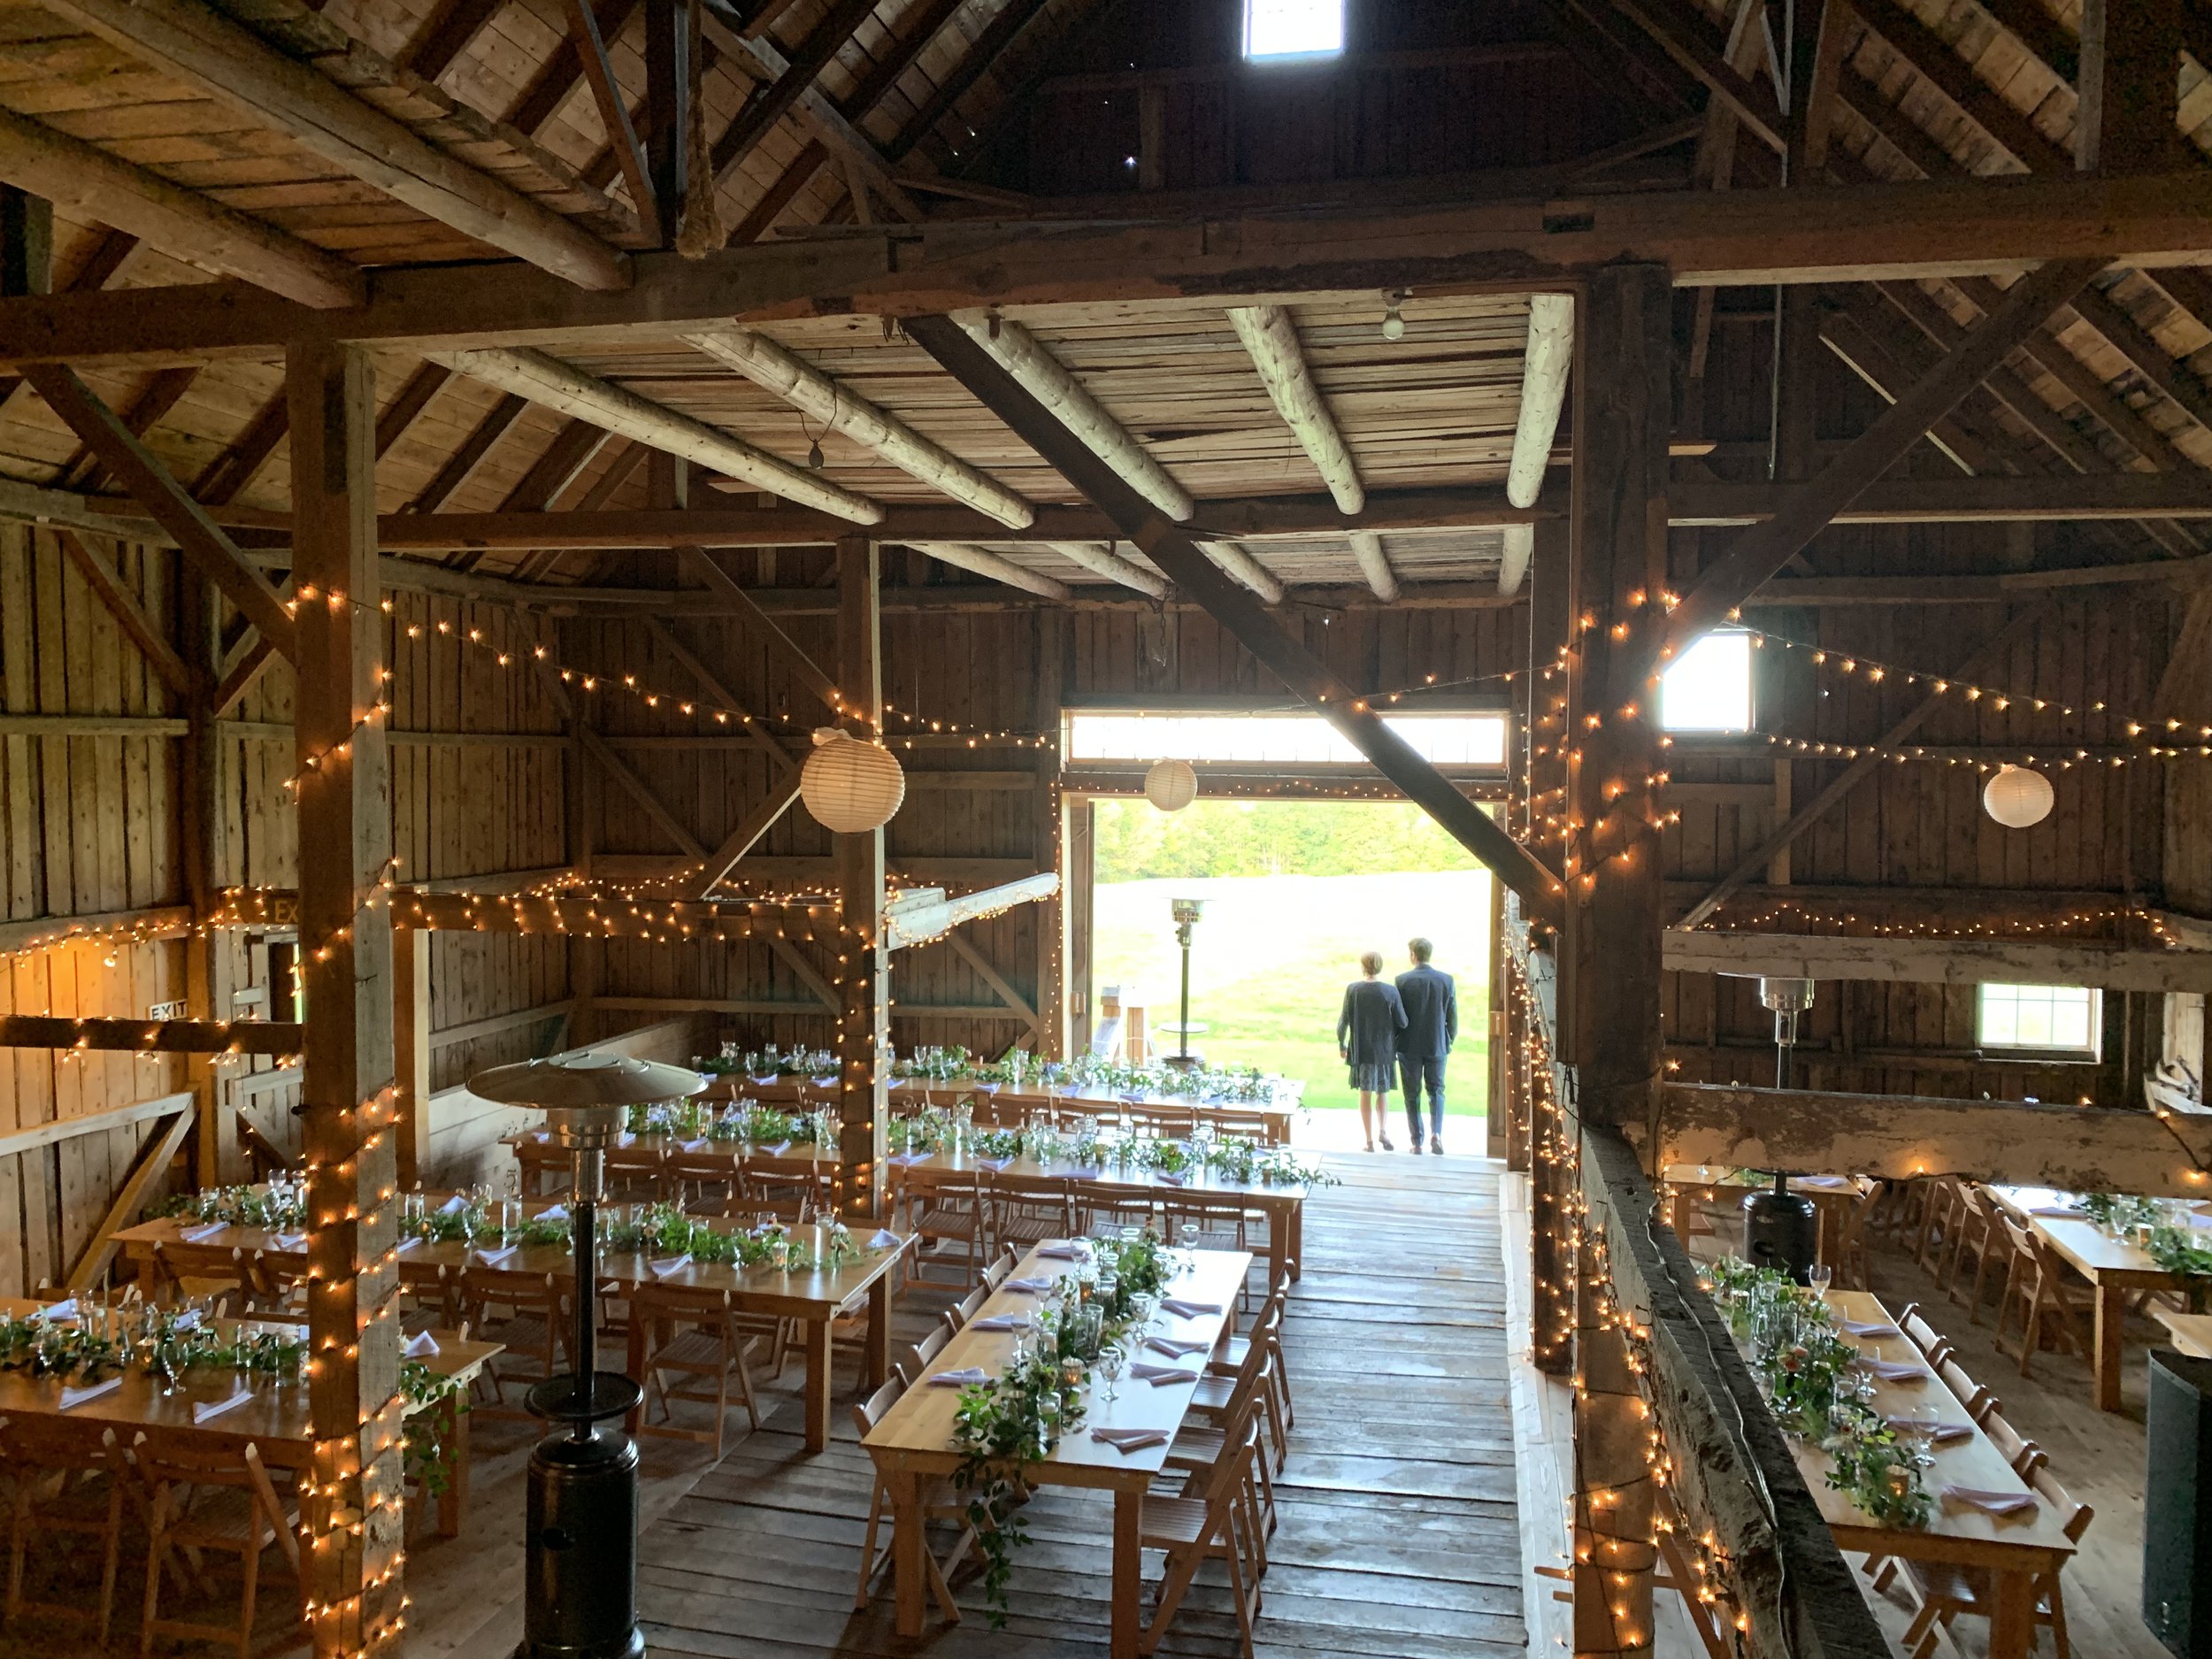 A view of a decorated barn ready for a wedding reception 